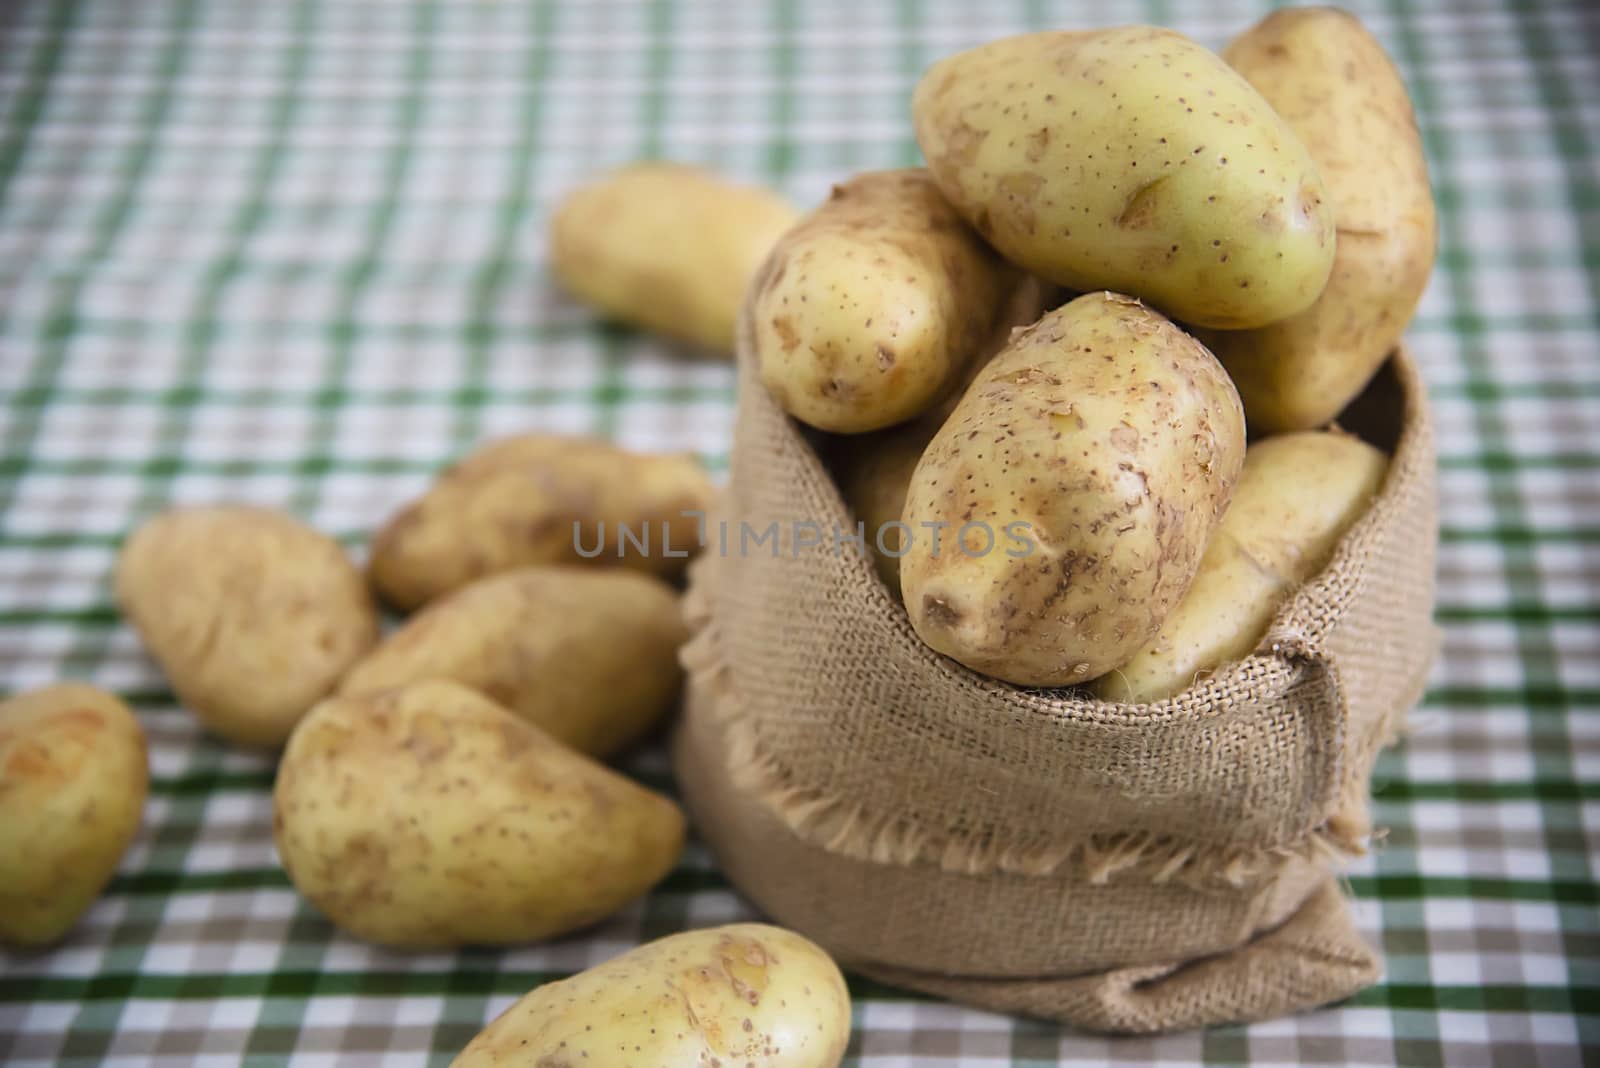 Fresh potato in kitchen ready to be cooked - fresh vegetable preparing for making food concept by pairhandmade